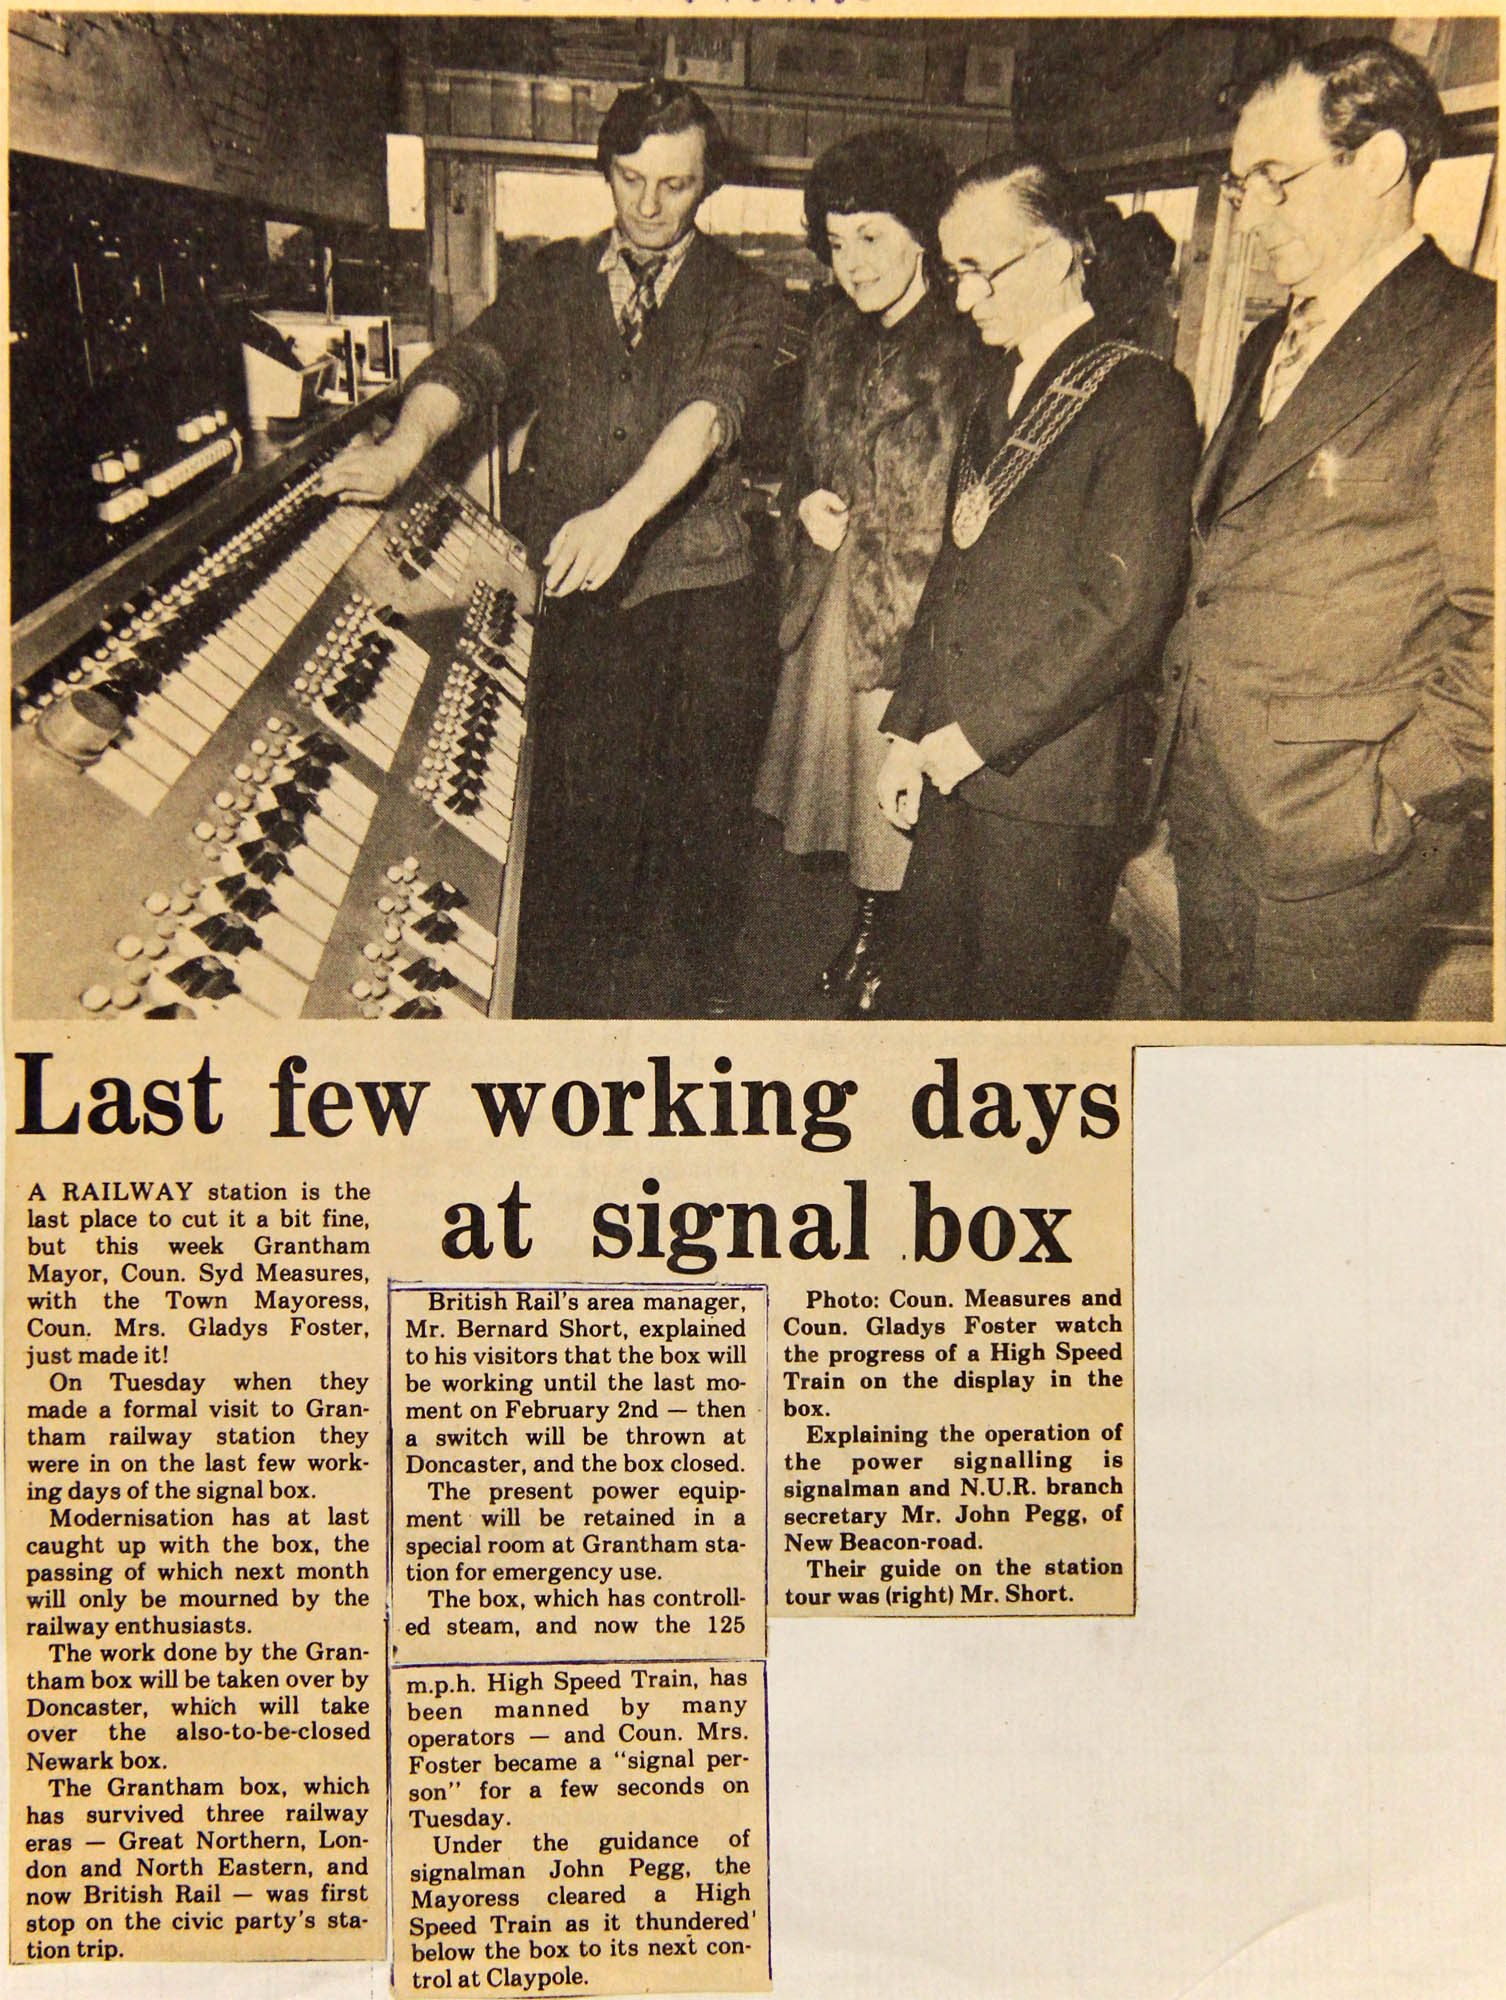 Early in 1980 the Mayor of Grantham made a formal visit to the station where John was on duty in the panel signal box. From the Local Studies Collection at Grantham Library.